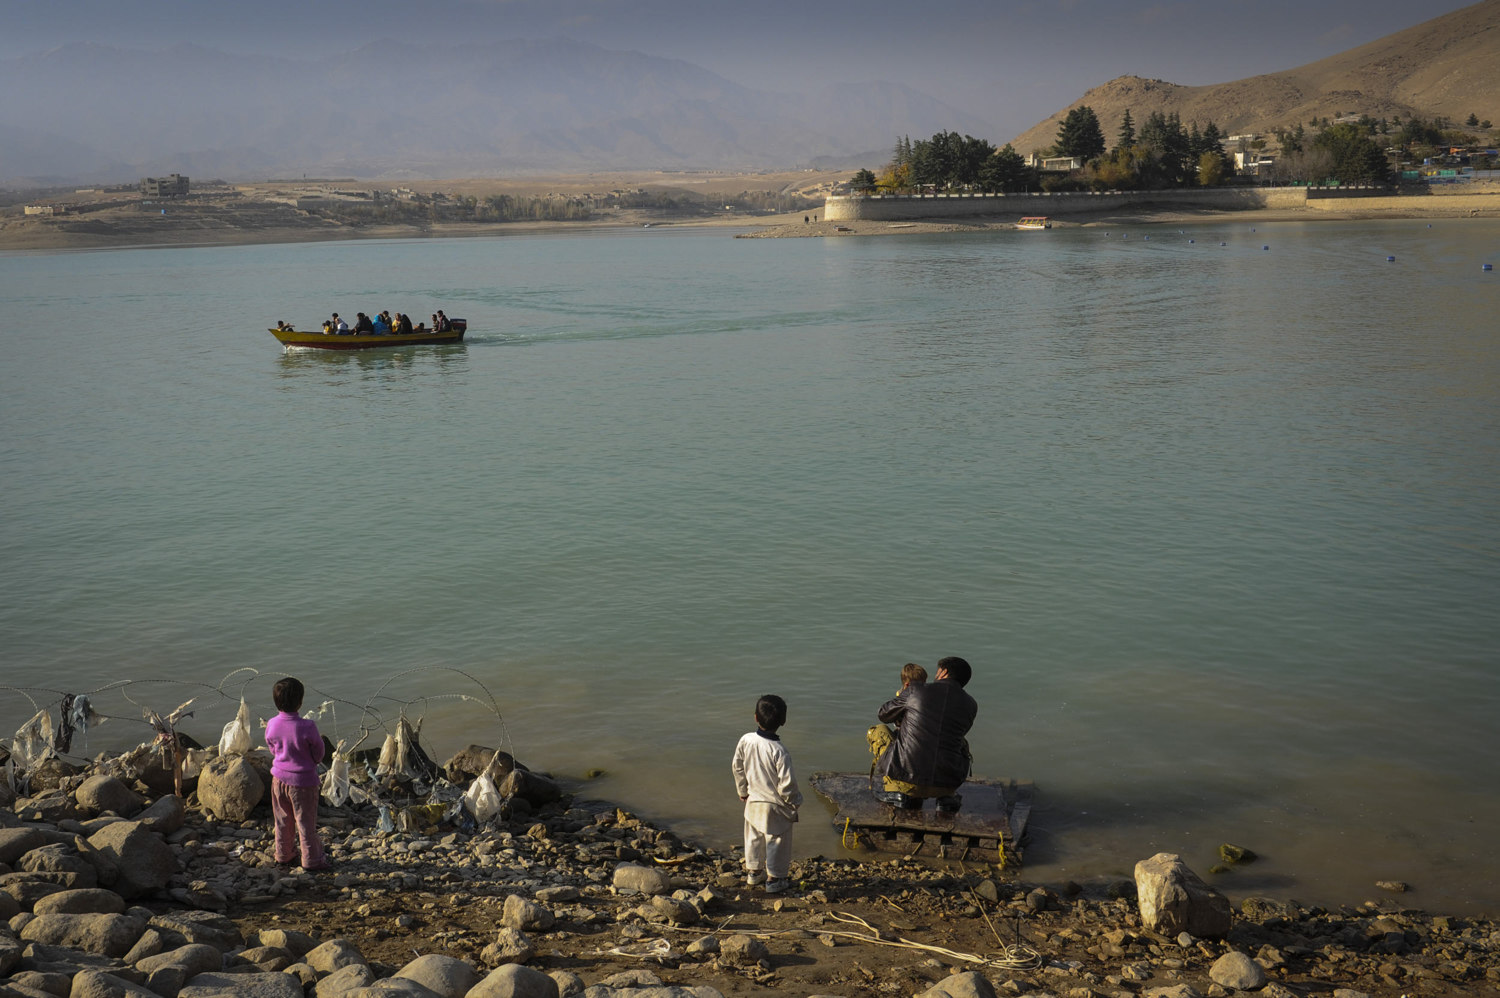  Lake Qargha 9km from Kabul, makes a great afternoon getaway from the city. Quarga is a man-made lake created by the damming of the Kabul river and is a lovely recreational place for Afghans with clean water for swimming, paddle boats, motor boats an